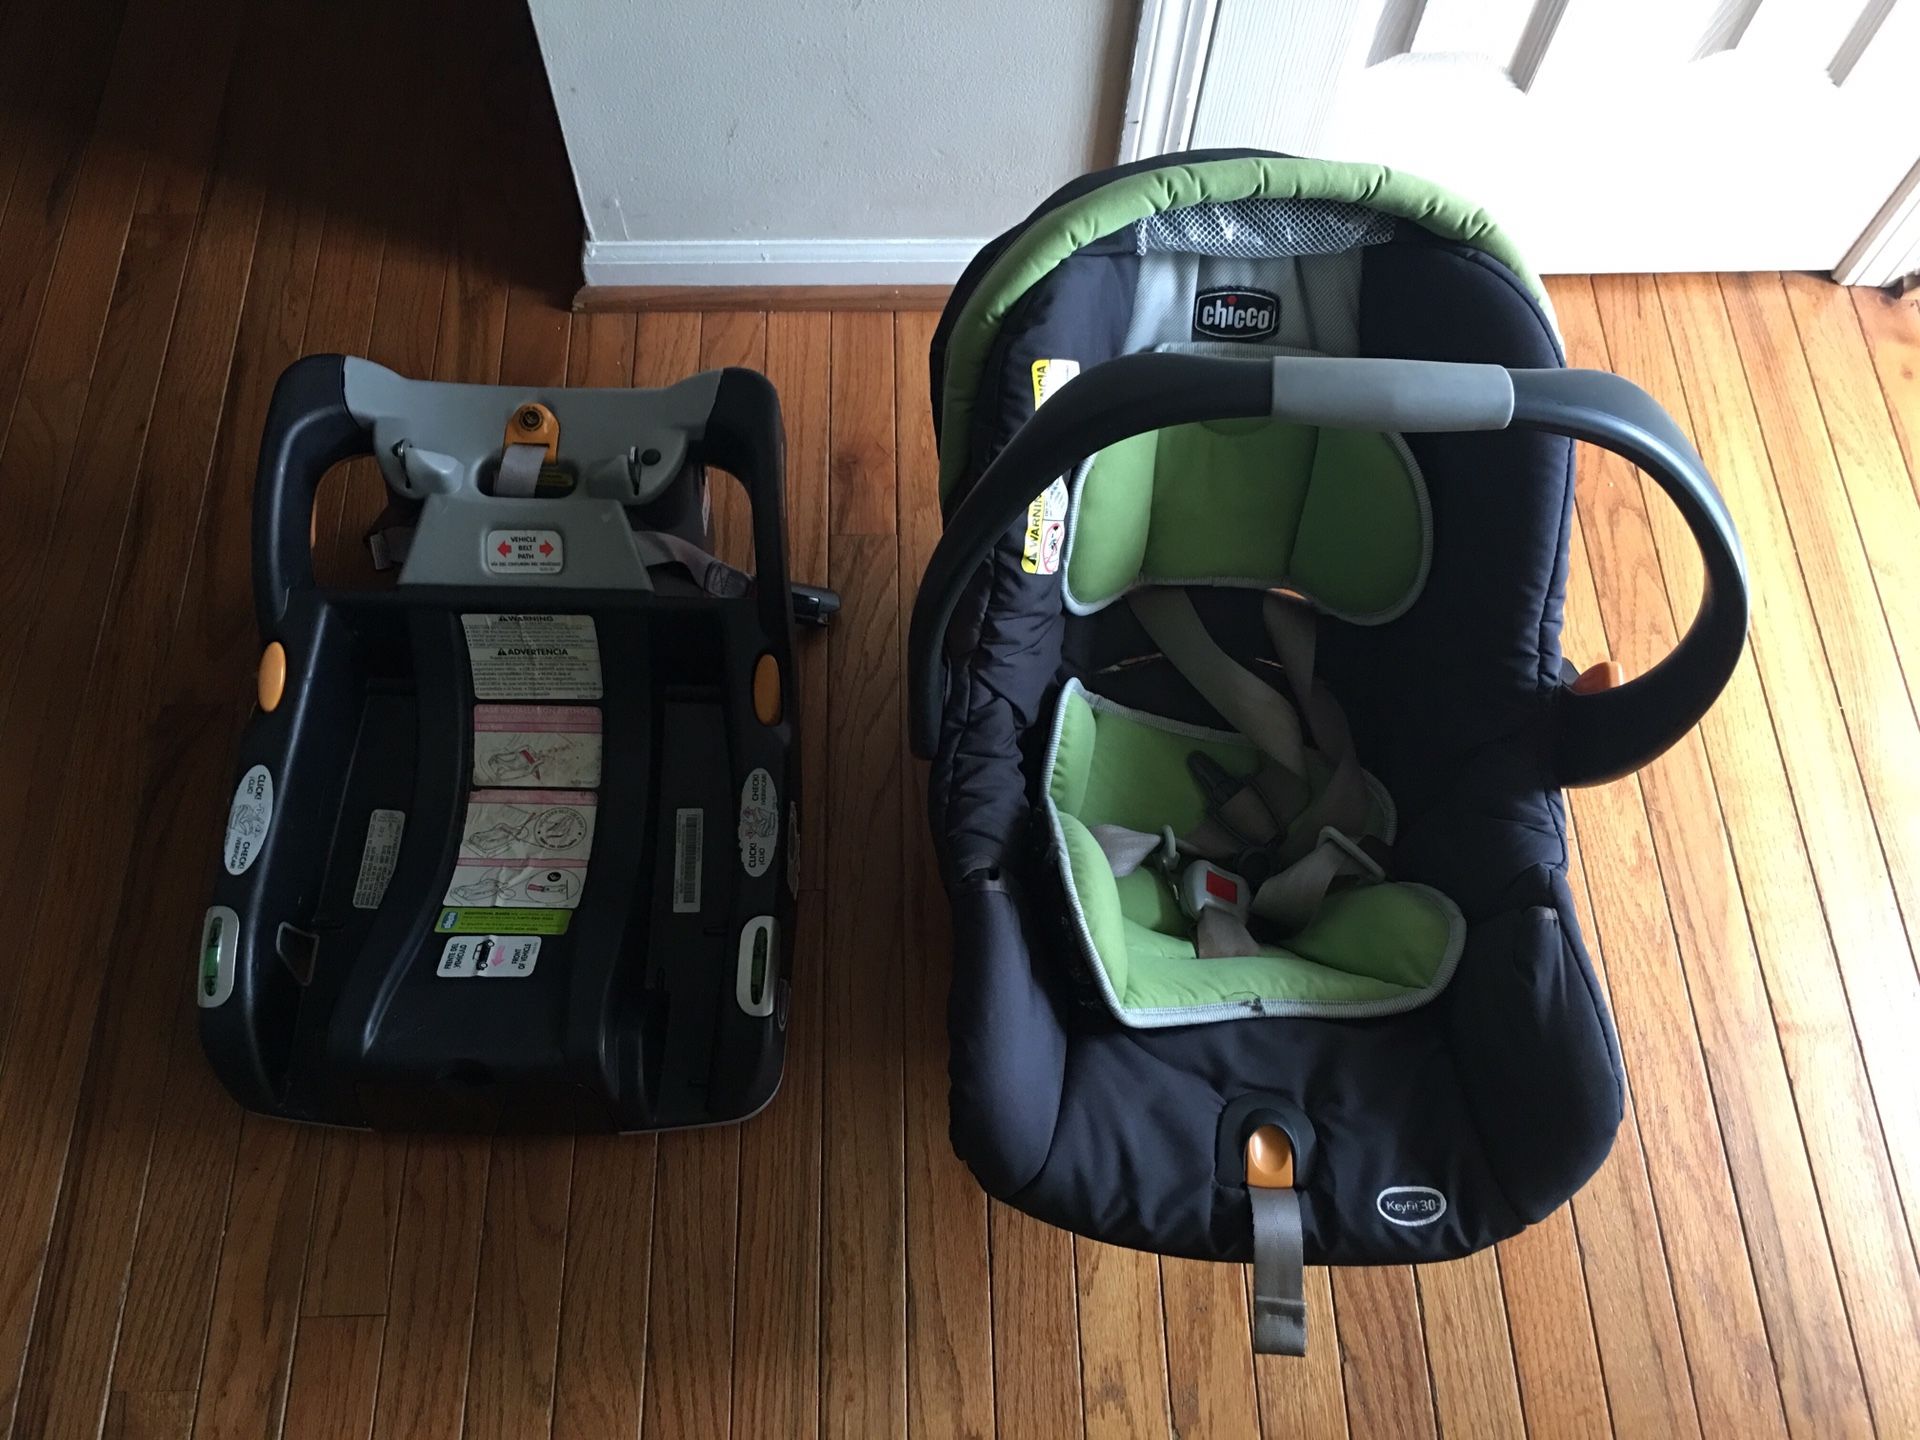 Chicco Infant Car Seat and Base